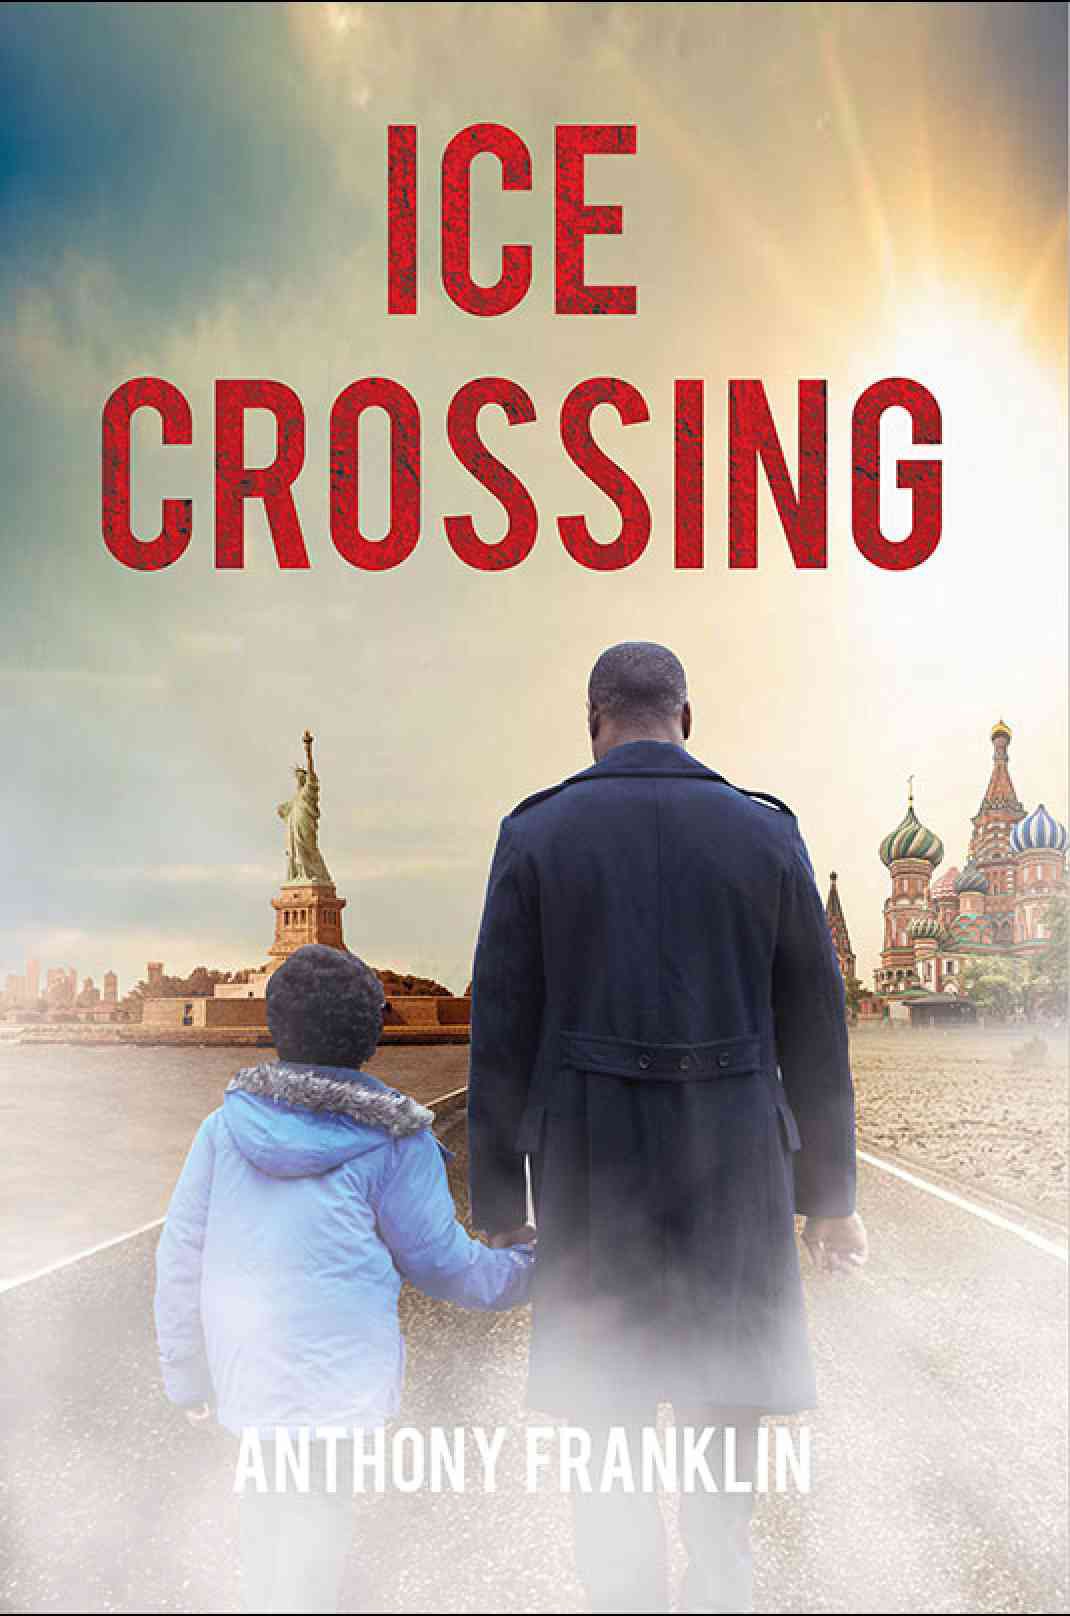 Fupping.com Featured Austin Macauley’s Book Ice Crossing by Anthony Franklin 